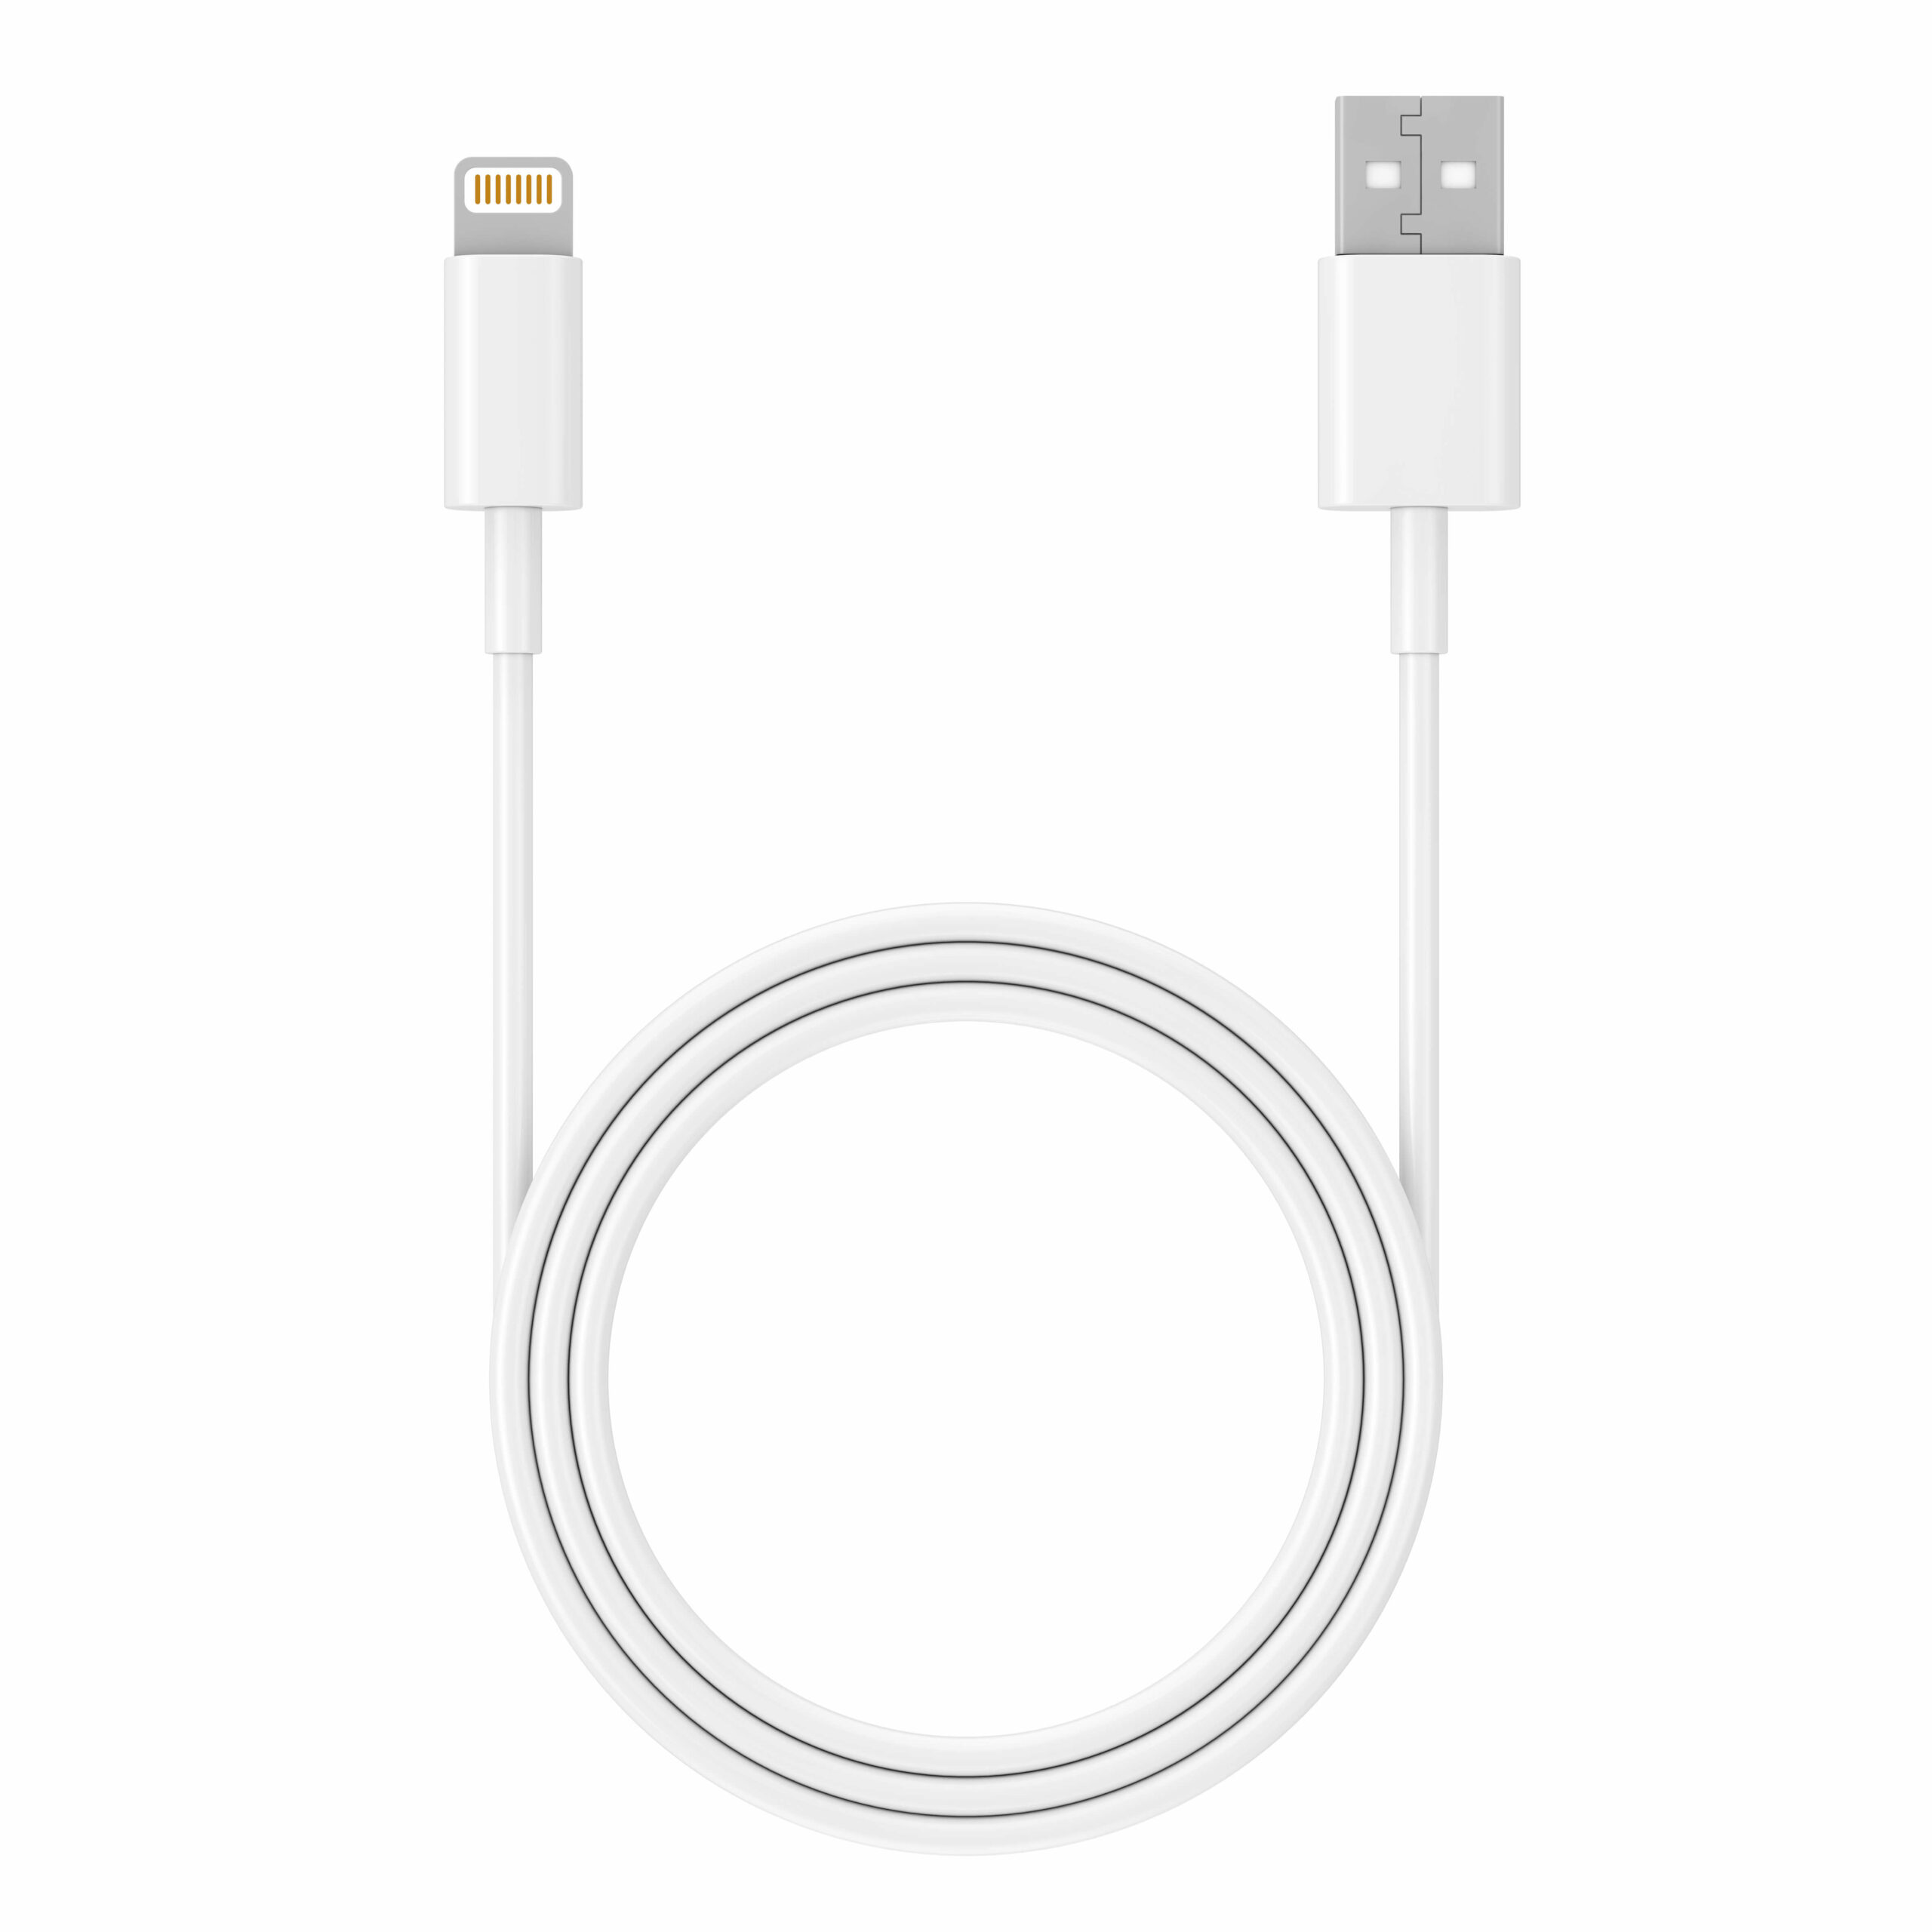 Which Charger Cable Is Best for Fast Charging iPhone